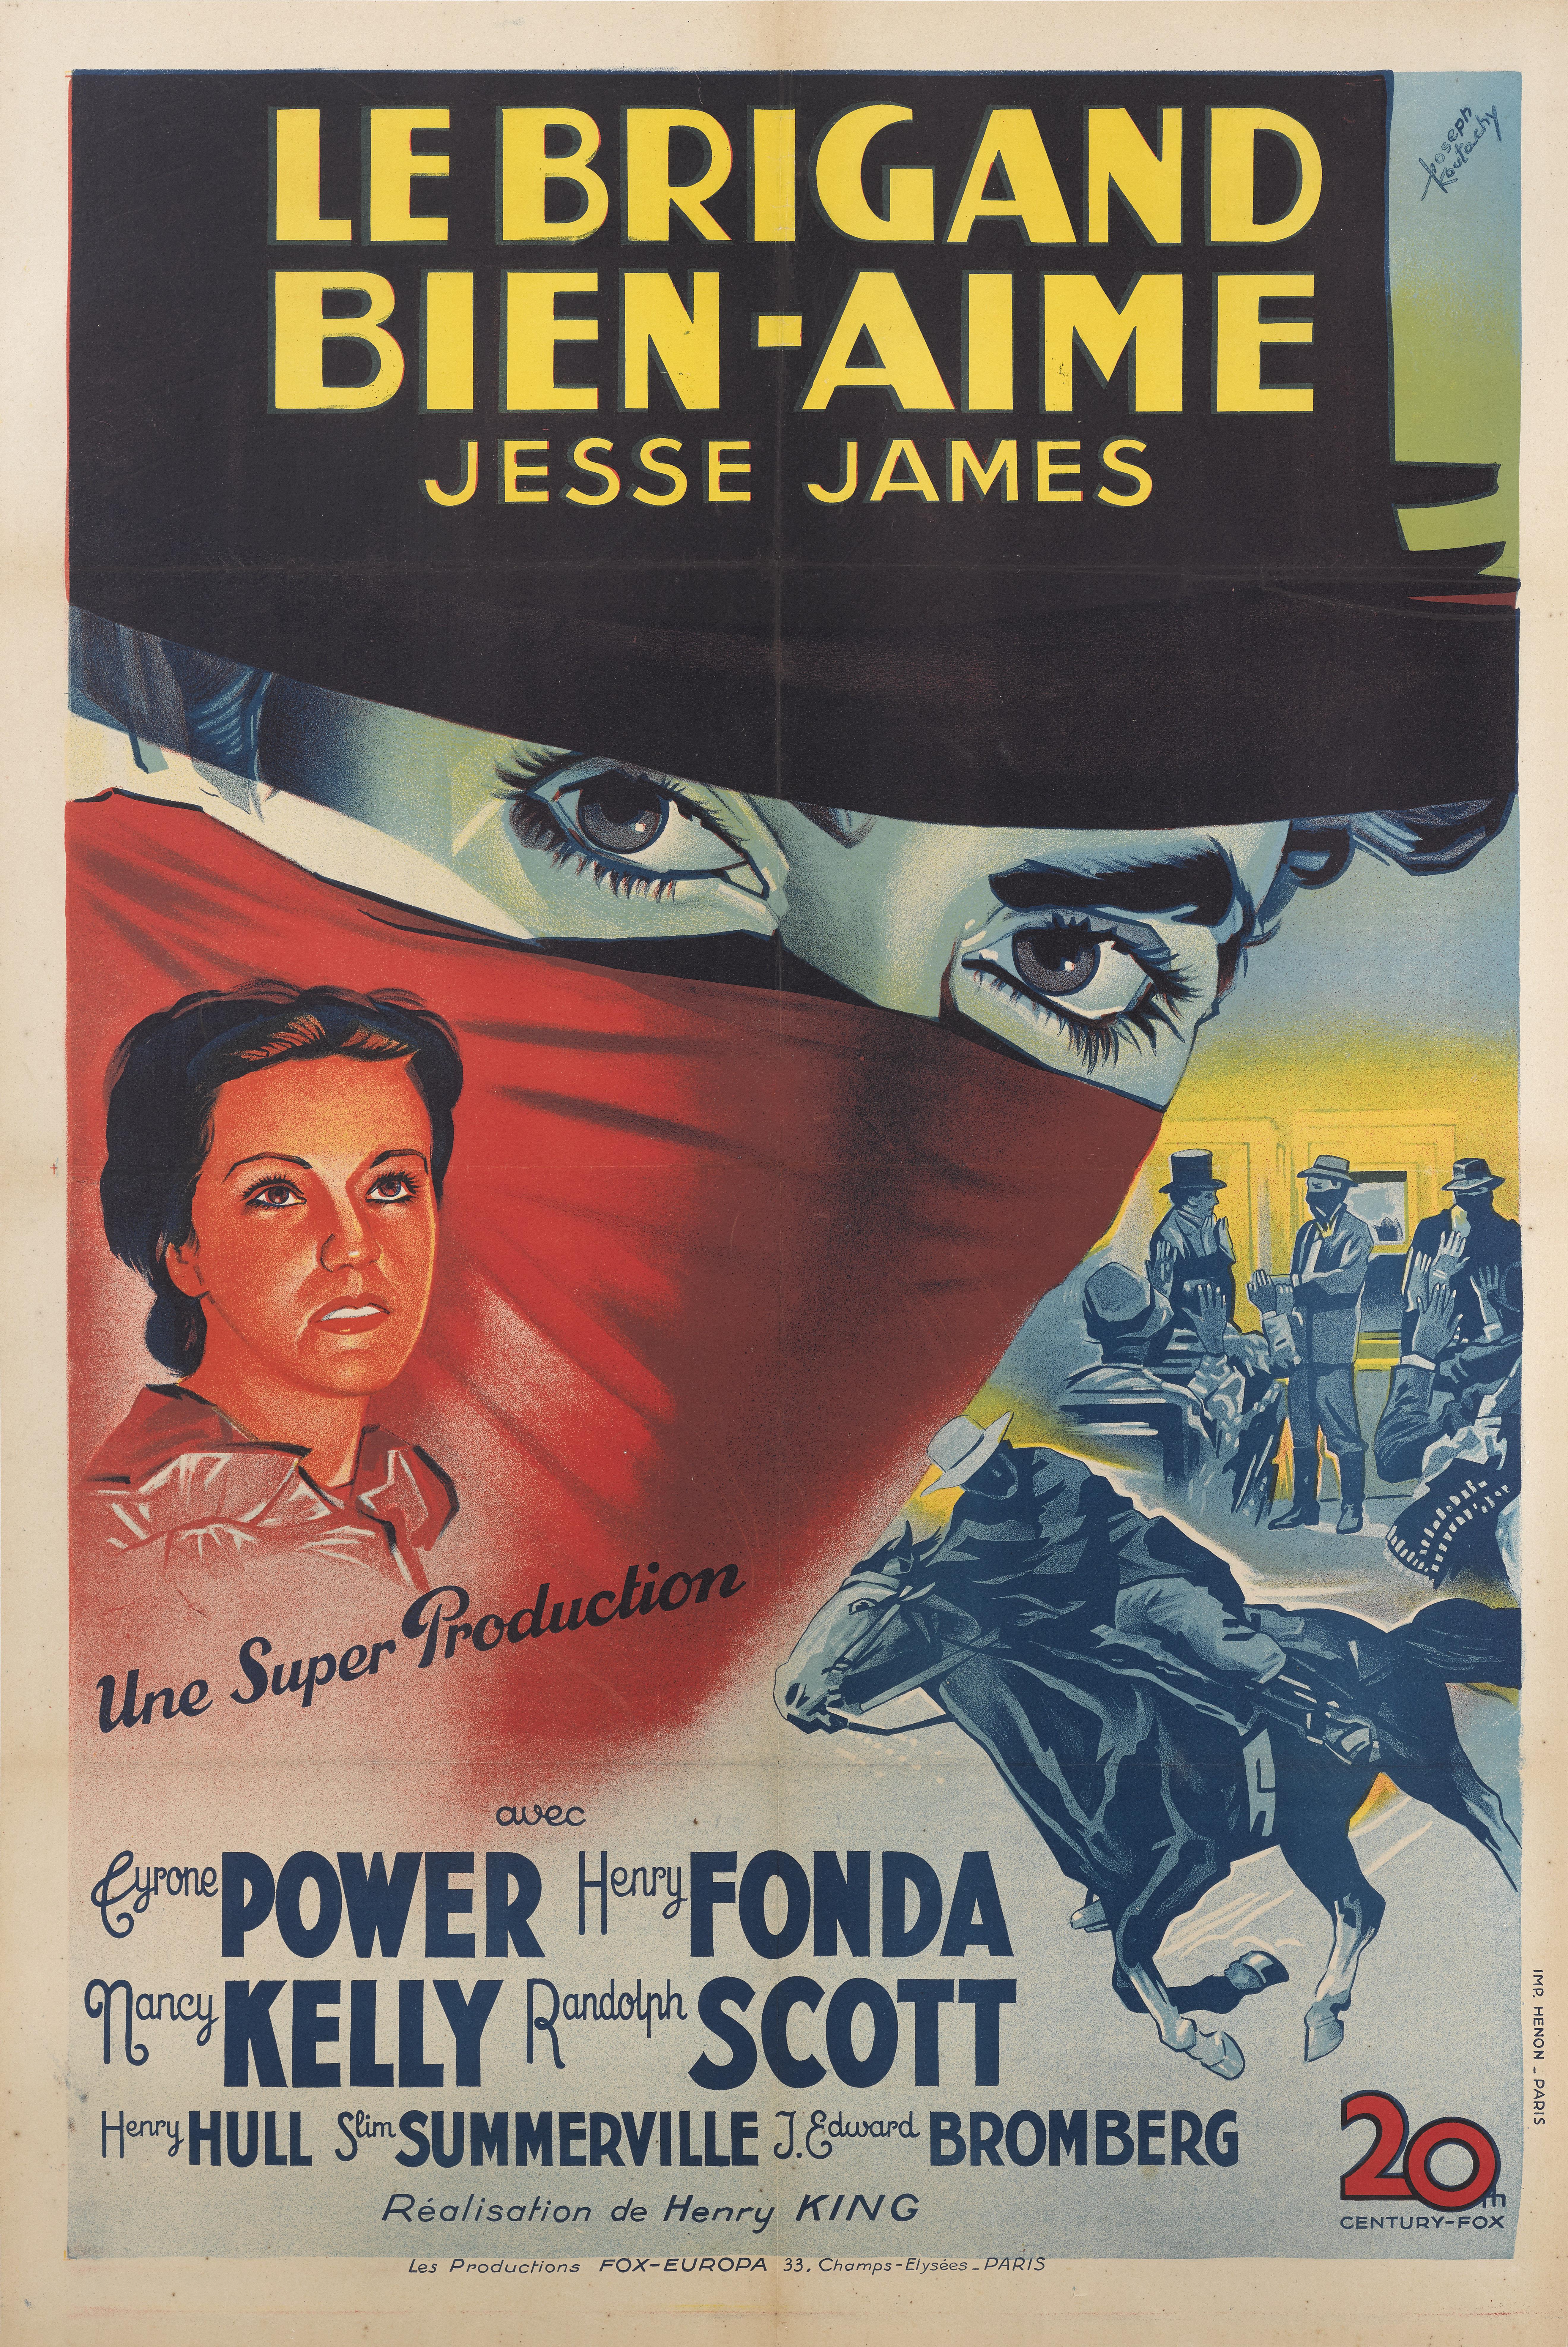 Original French film poster for the 1939 Western. This film was directed by Henry King, and stars Tyrone Power, Henry Fonda, Nancy Kelly and Randolph Scott. The film is broadly based on the life of the notorious outlaw Jesse James. The James family